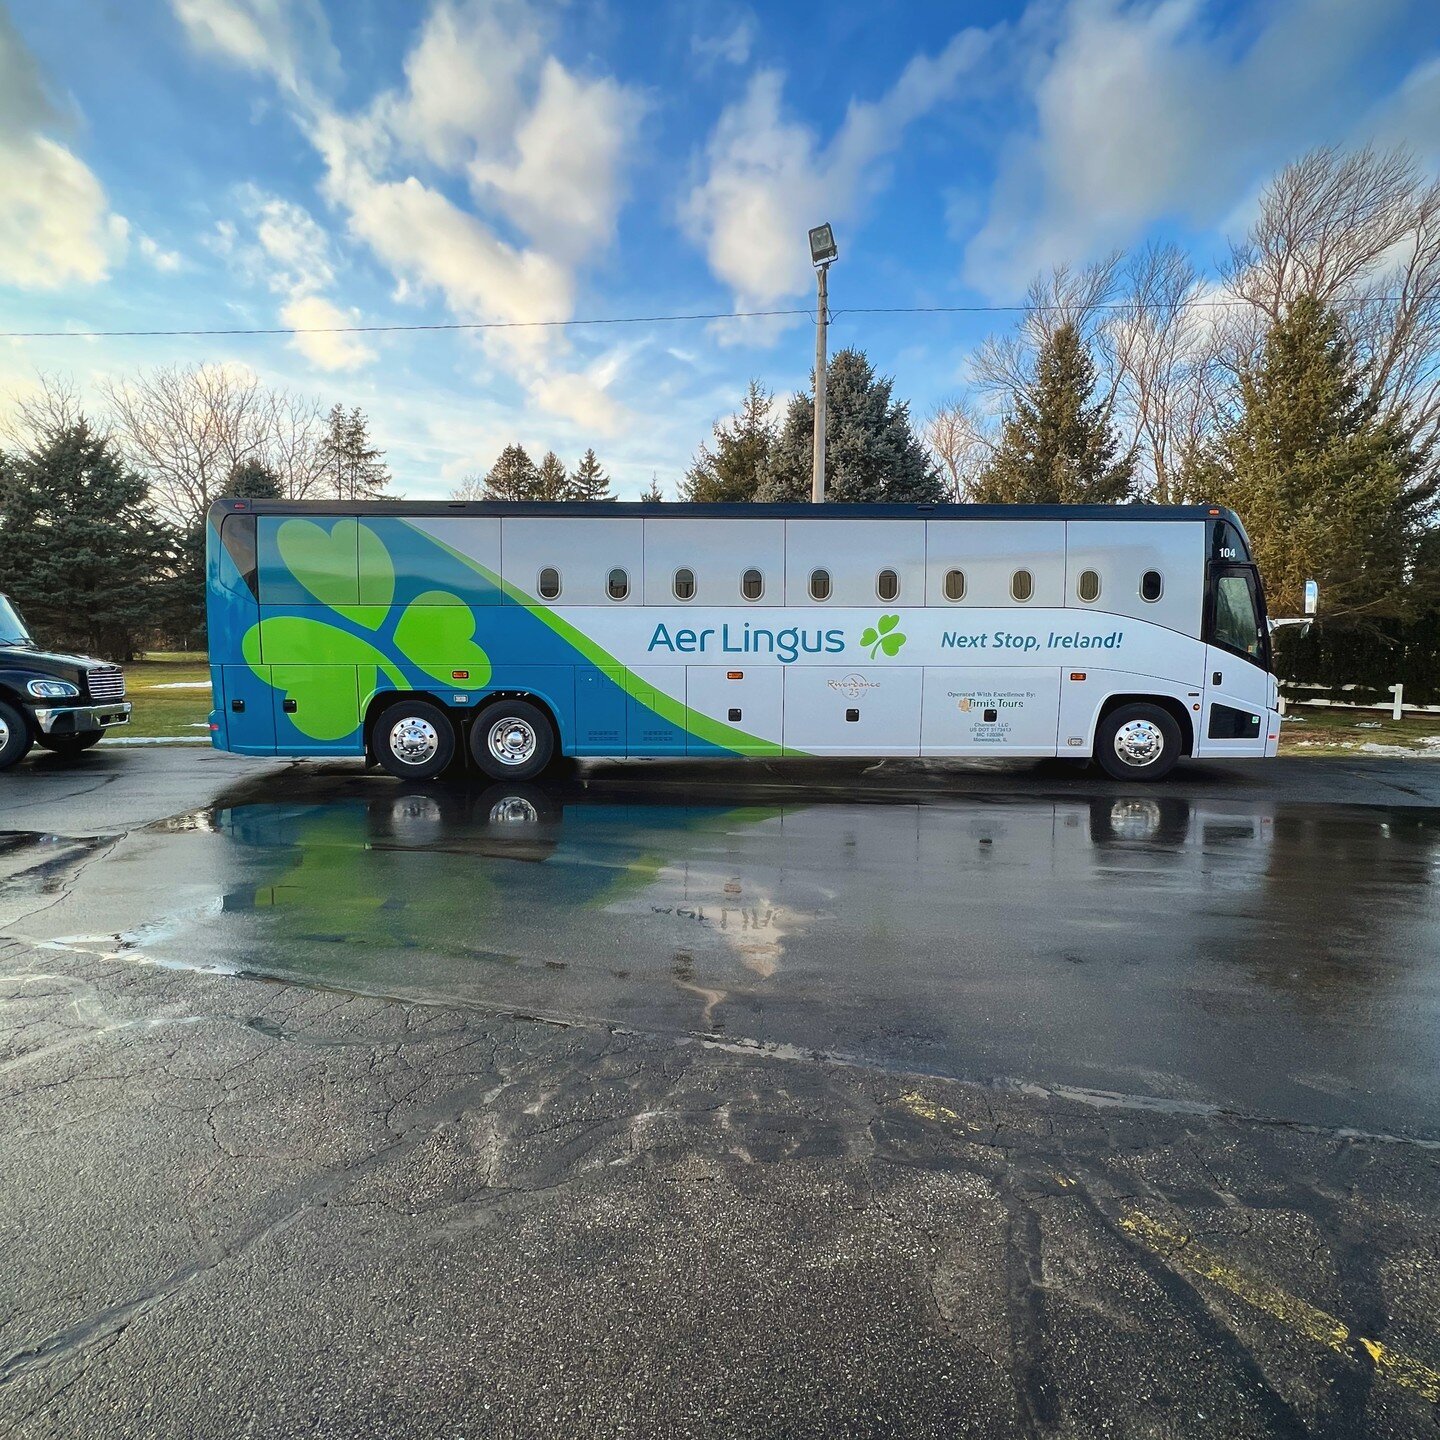 We were so happy to help install an Aer Lingus bus wrap with The Graphics Garage. This project was a huge success - not only did it keep the client happy, but it also involved 2 buses in just 3 days! We're proud to be a 3M certified wrap company, and